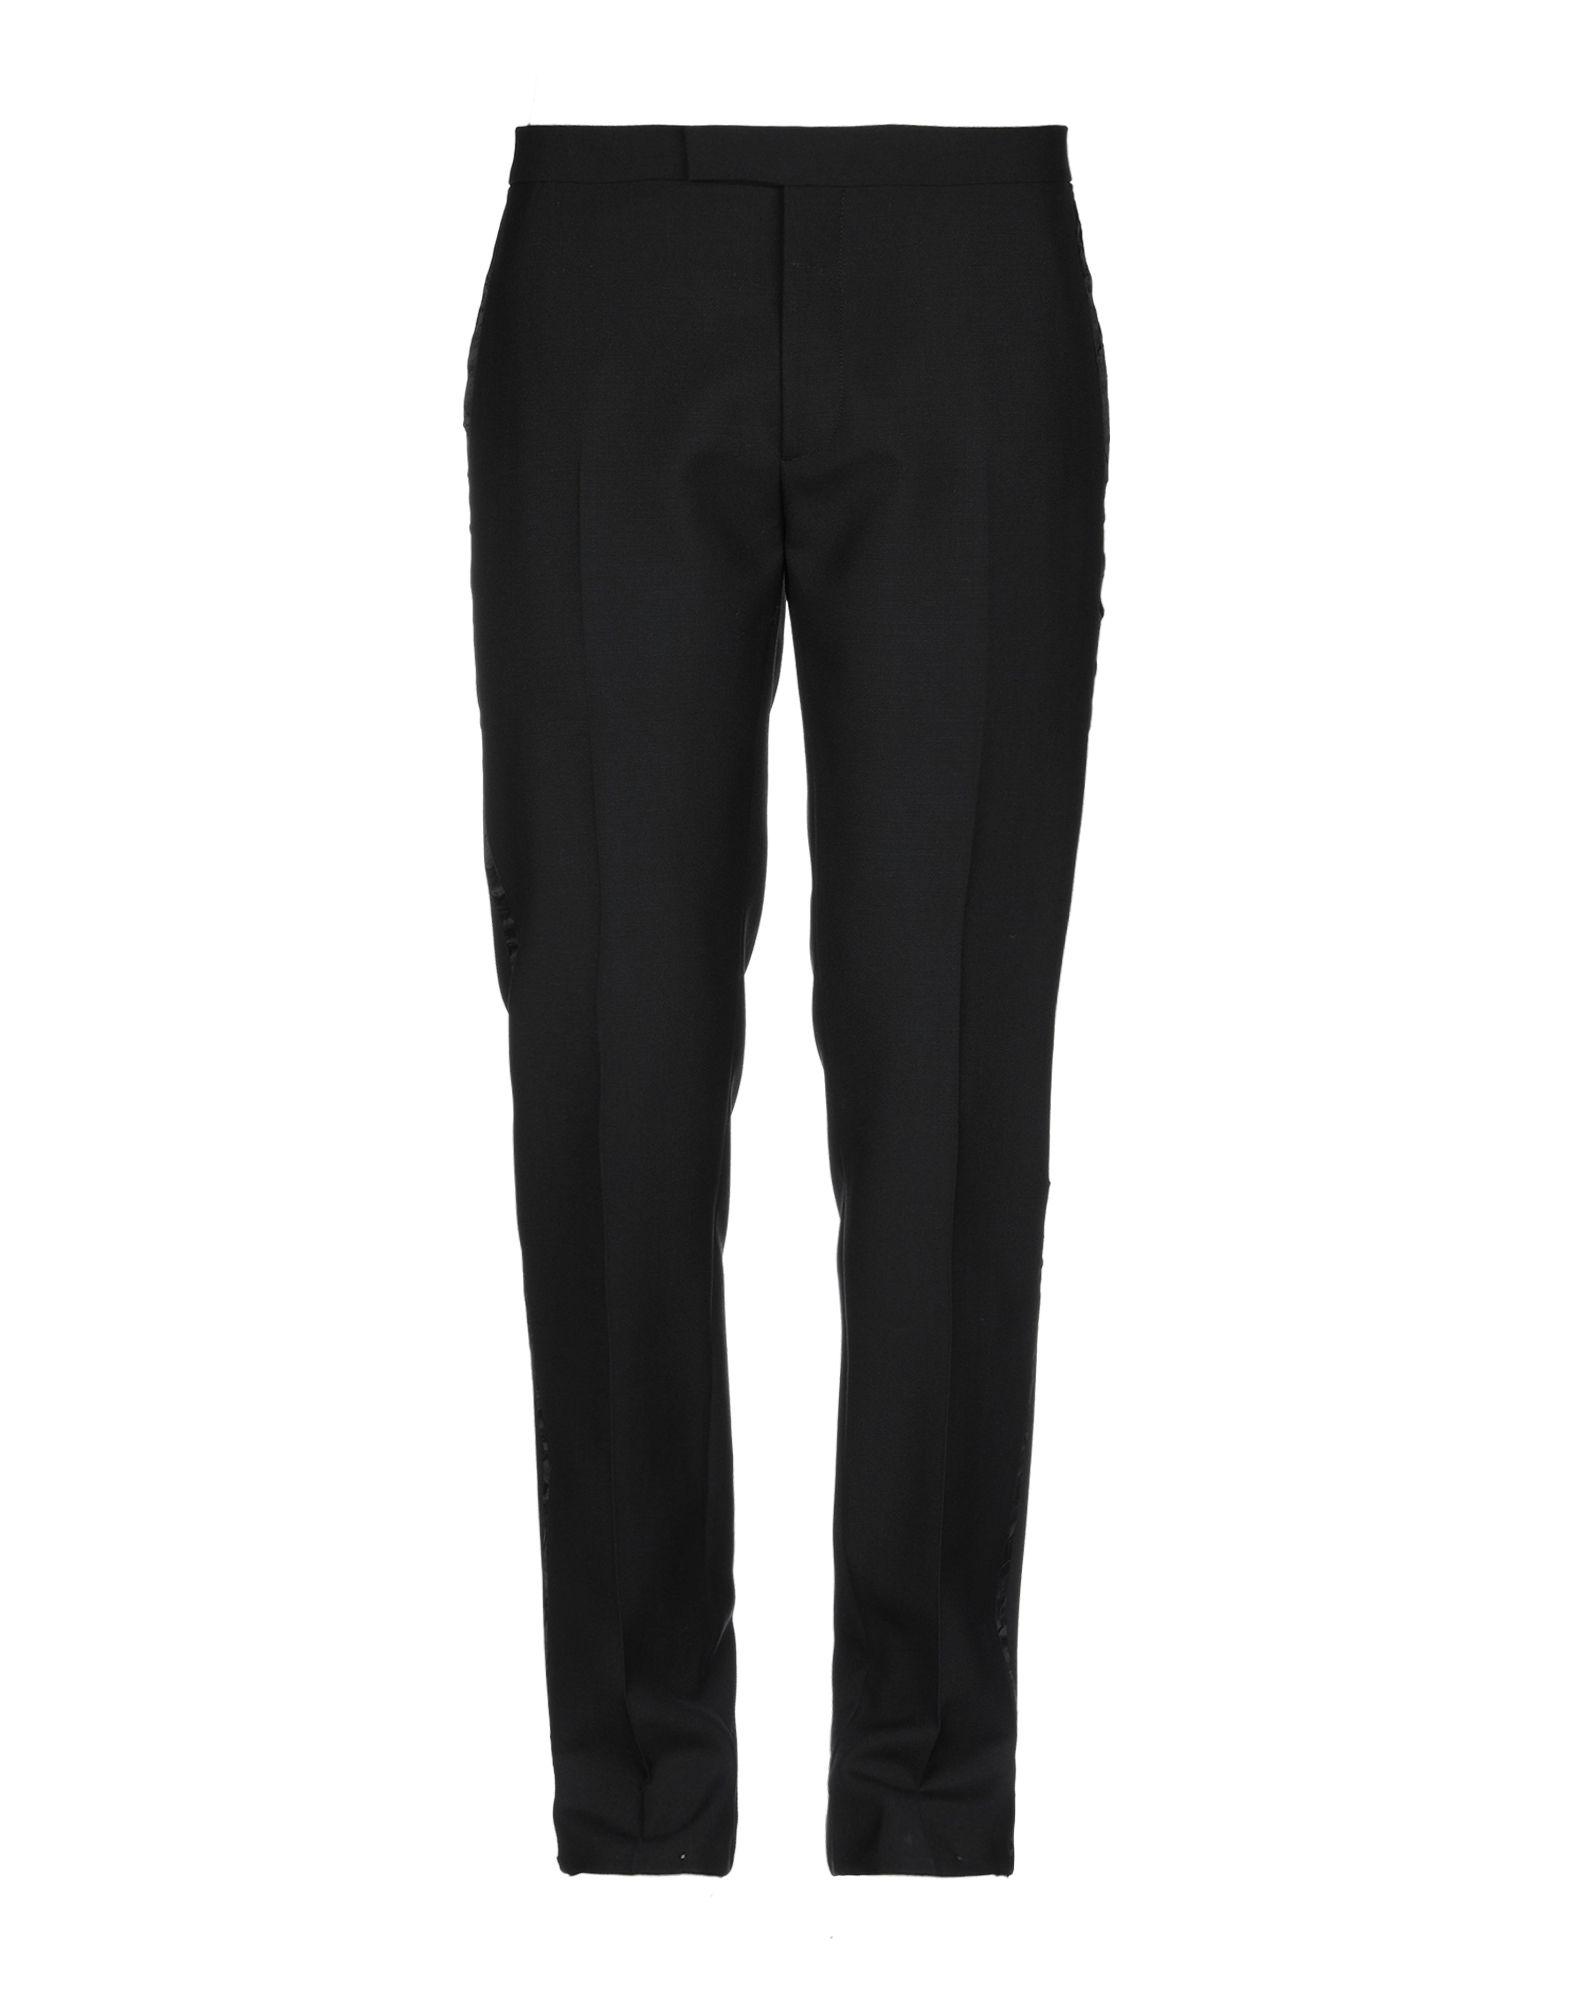 Dior Homme Casual Pants in Black for Men - Lyst